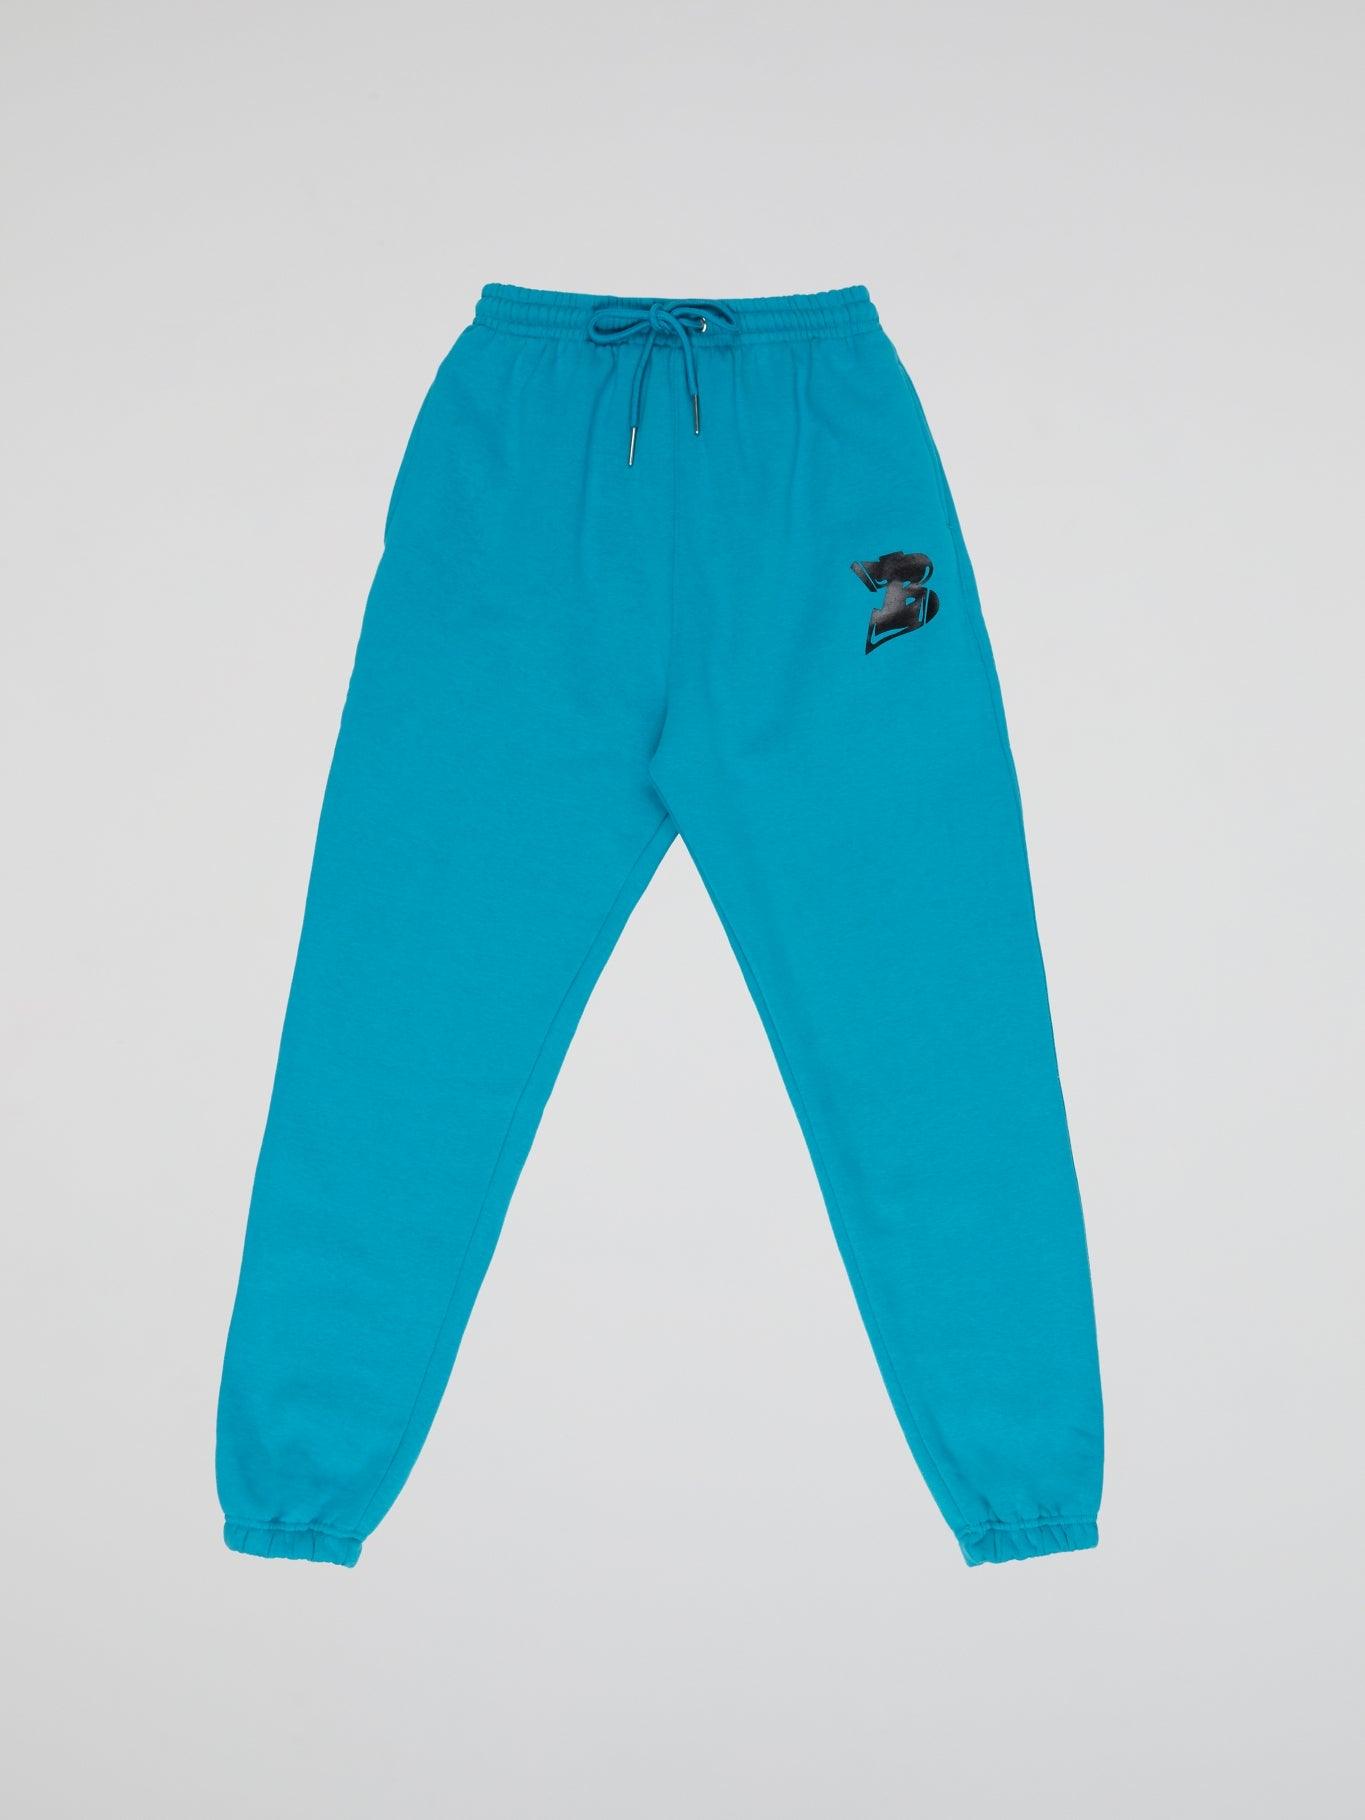 BHYPE LOGO ESSENTIALS PANTS TURQUOISE BLUE - B-Hype Society